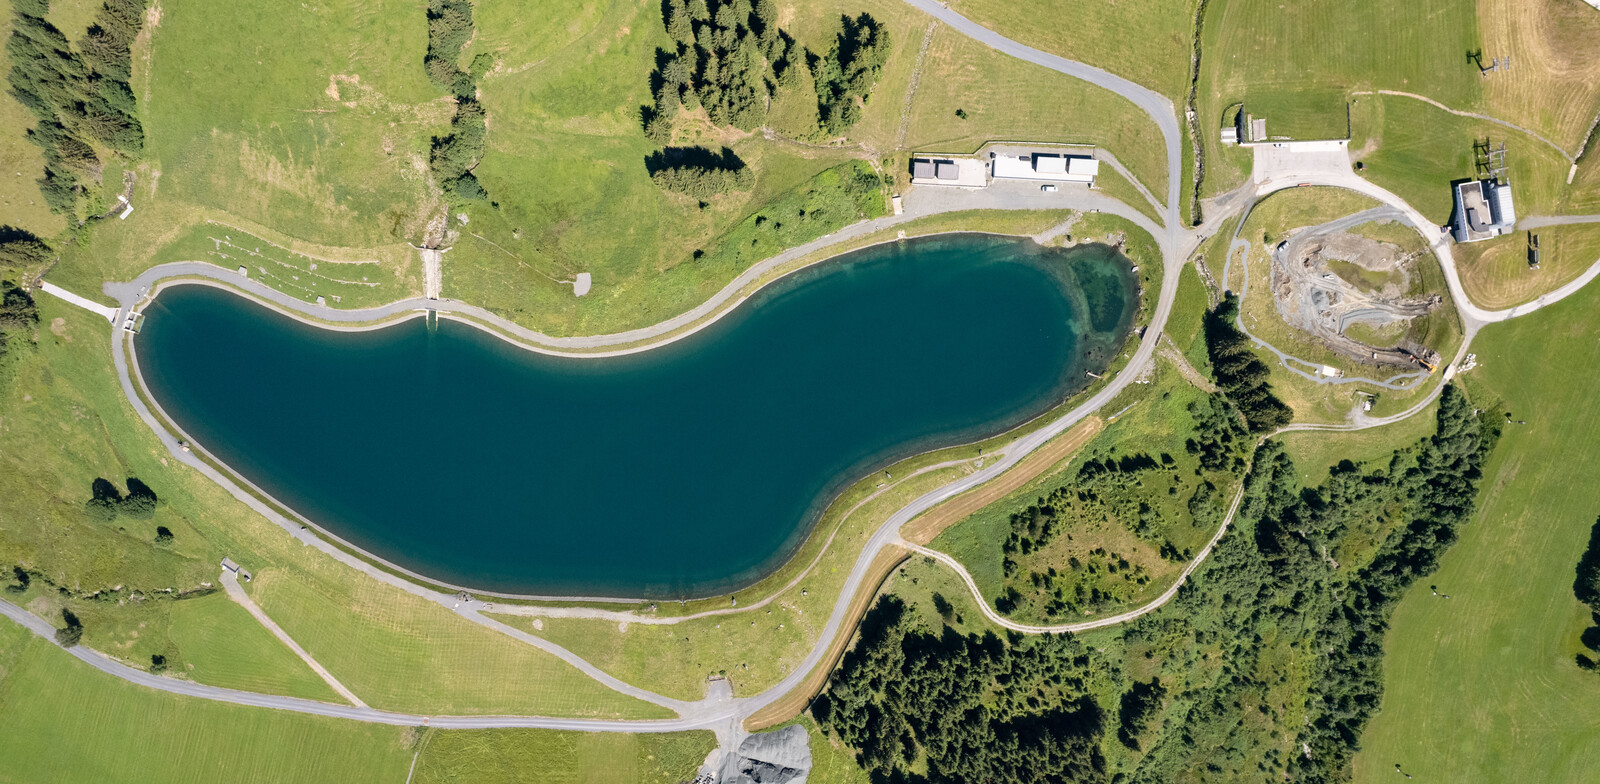 The reservoirs Hochalm II (left) and Hochalm I (right) during renaturation | © saalbach.com, Andreas Putz